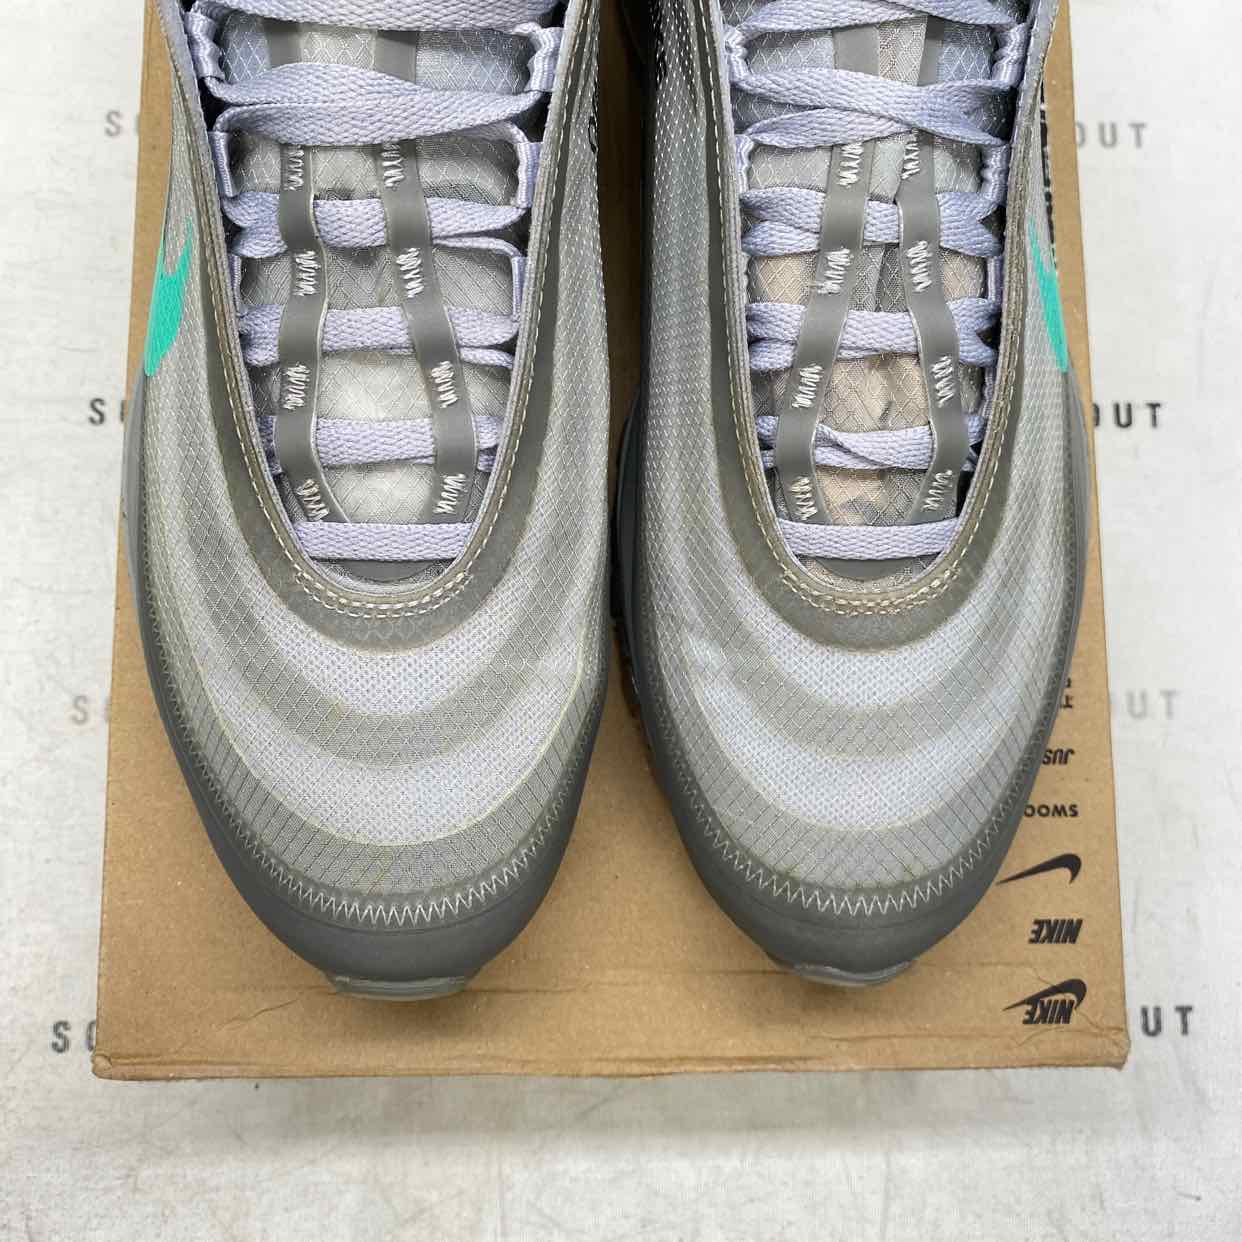 Nike Air Max 97 / OW "Menta" 2018 Used Size 9